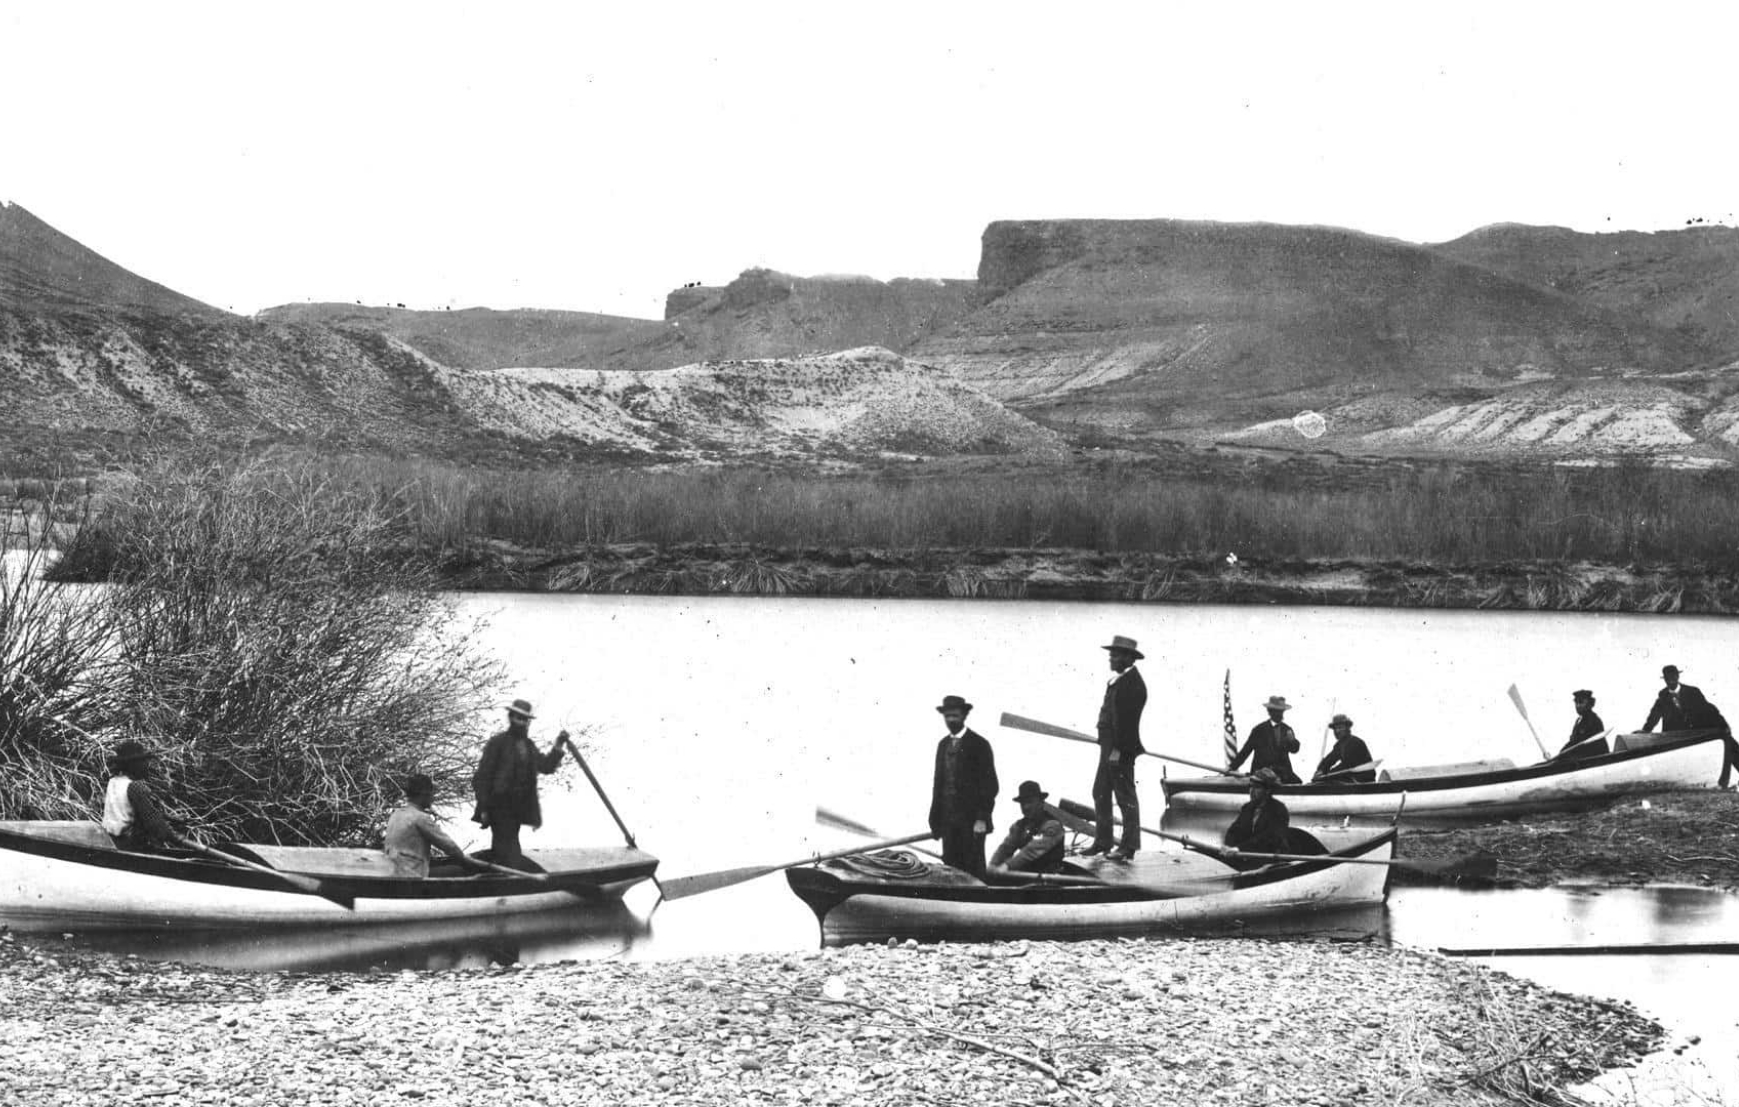 John Wesley Powell’s second expedition